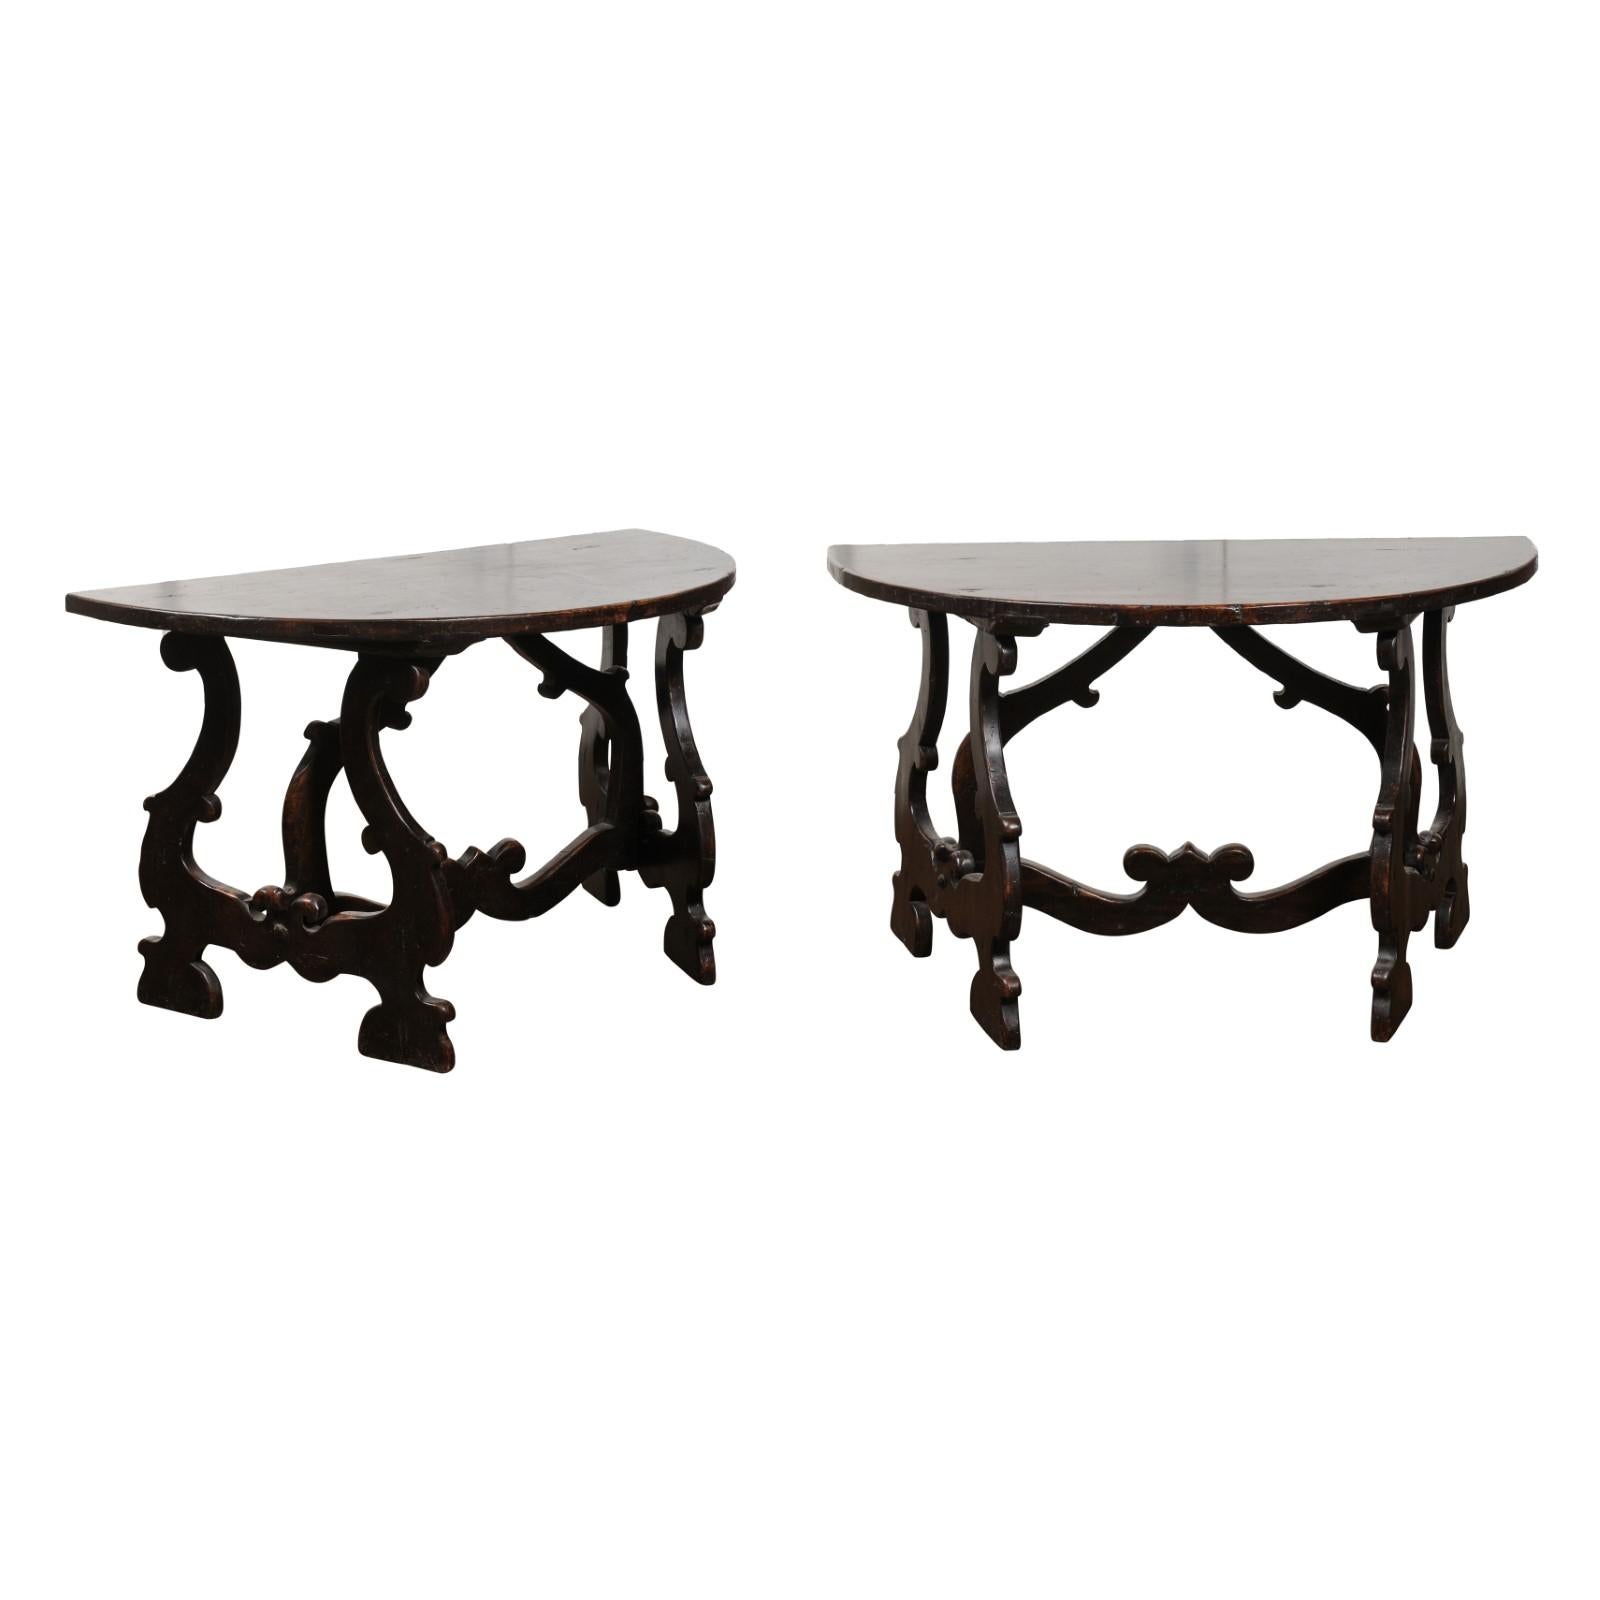 Pair of Italian Baroque Style Walnut Demilune Tables from Tuscany, circa 1800